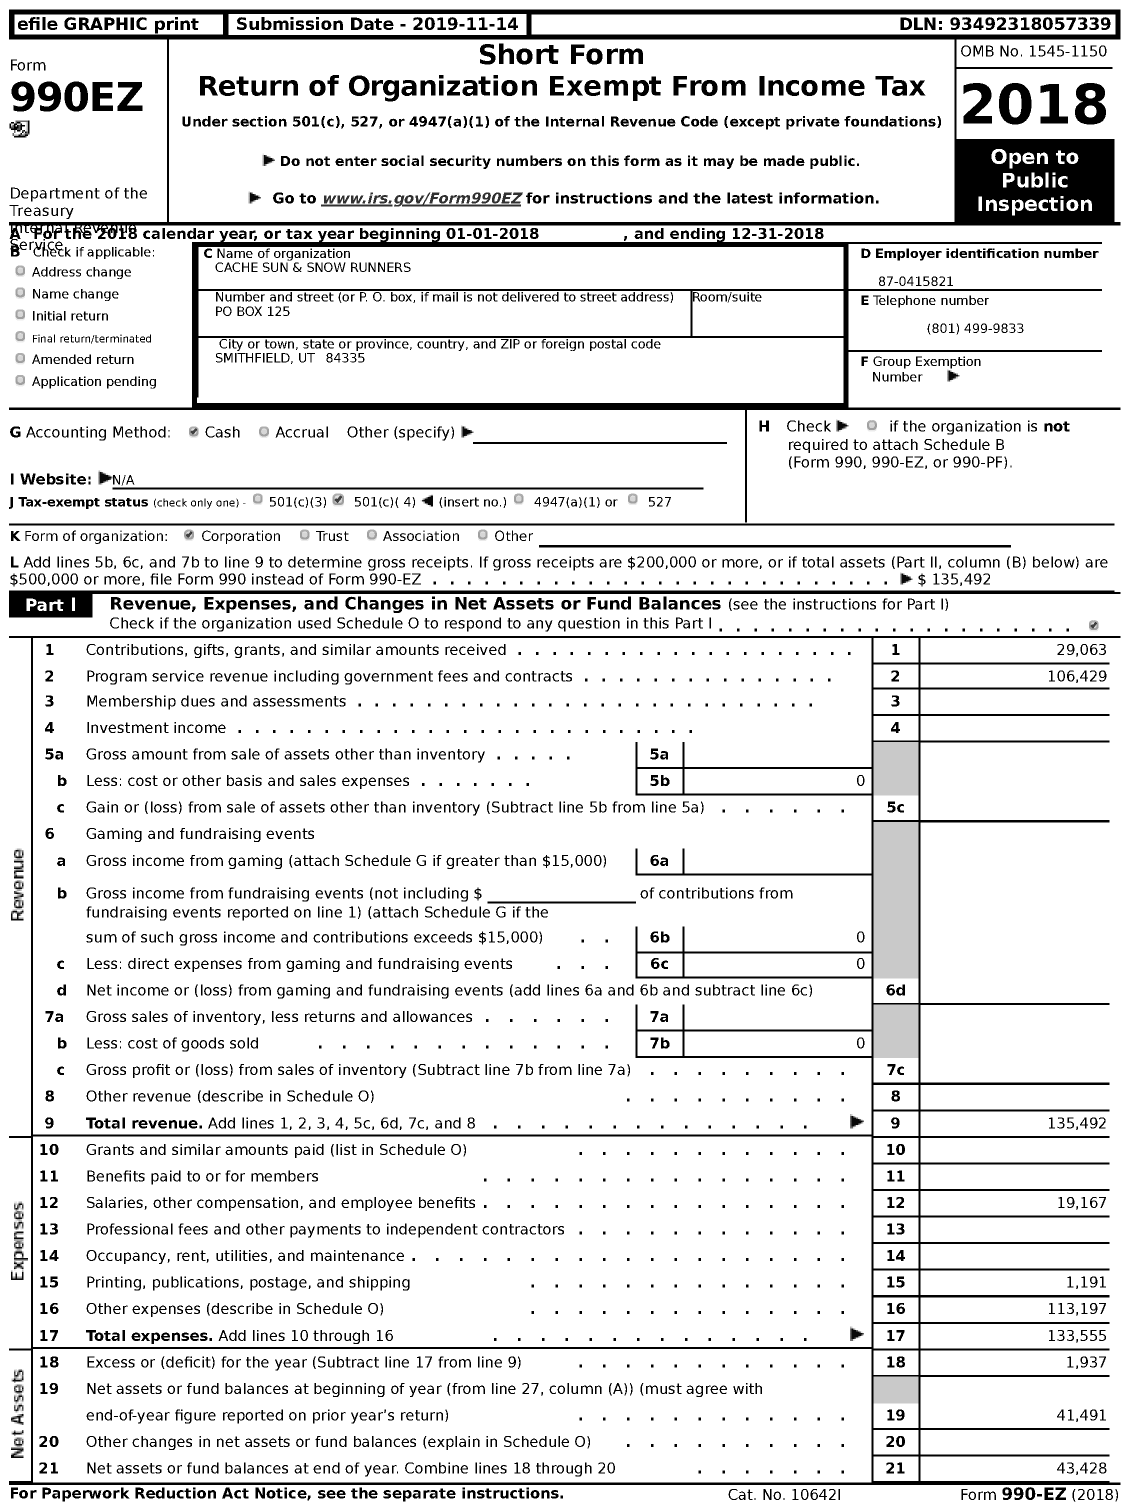 Image of first page of 2018 Form 990EZ for Cache Sun and Snow Runners